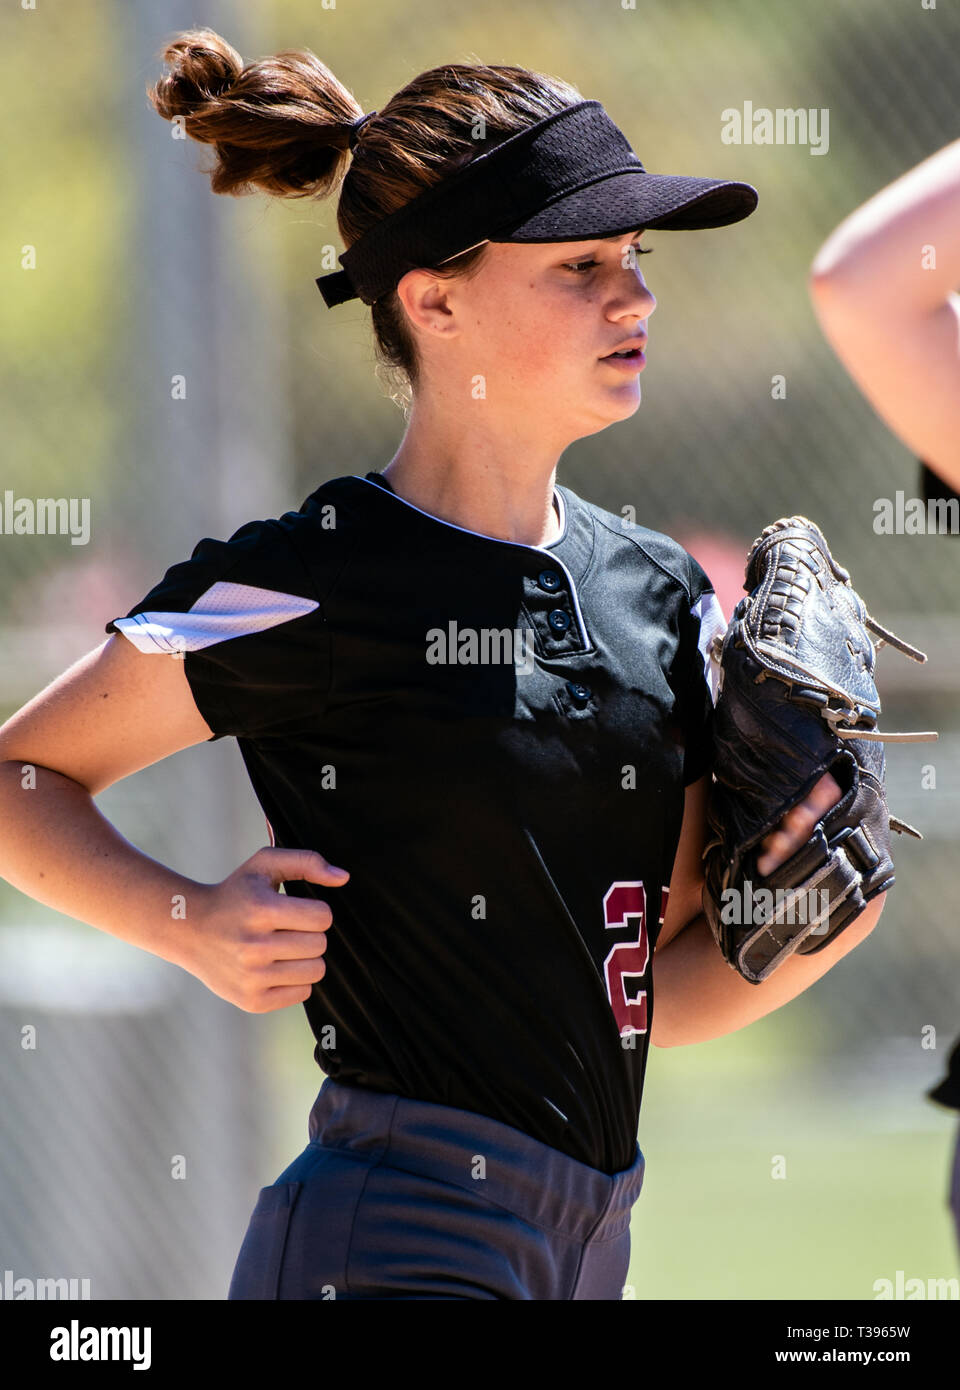 Female teenage softball player in black uniform jogging in from the field. Stock Photo